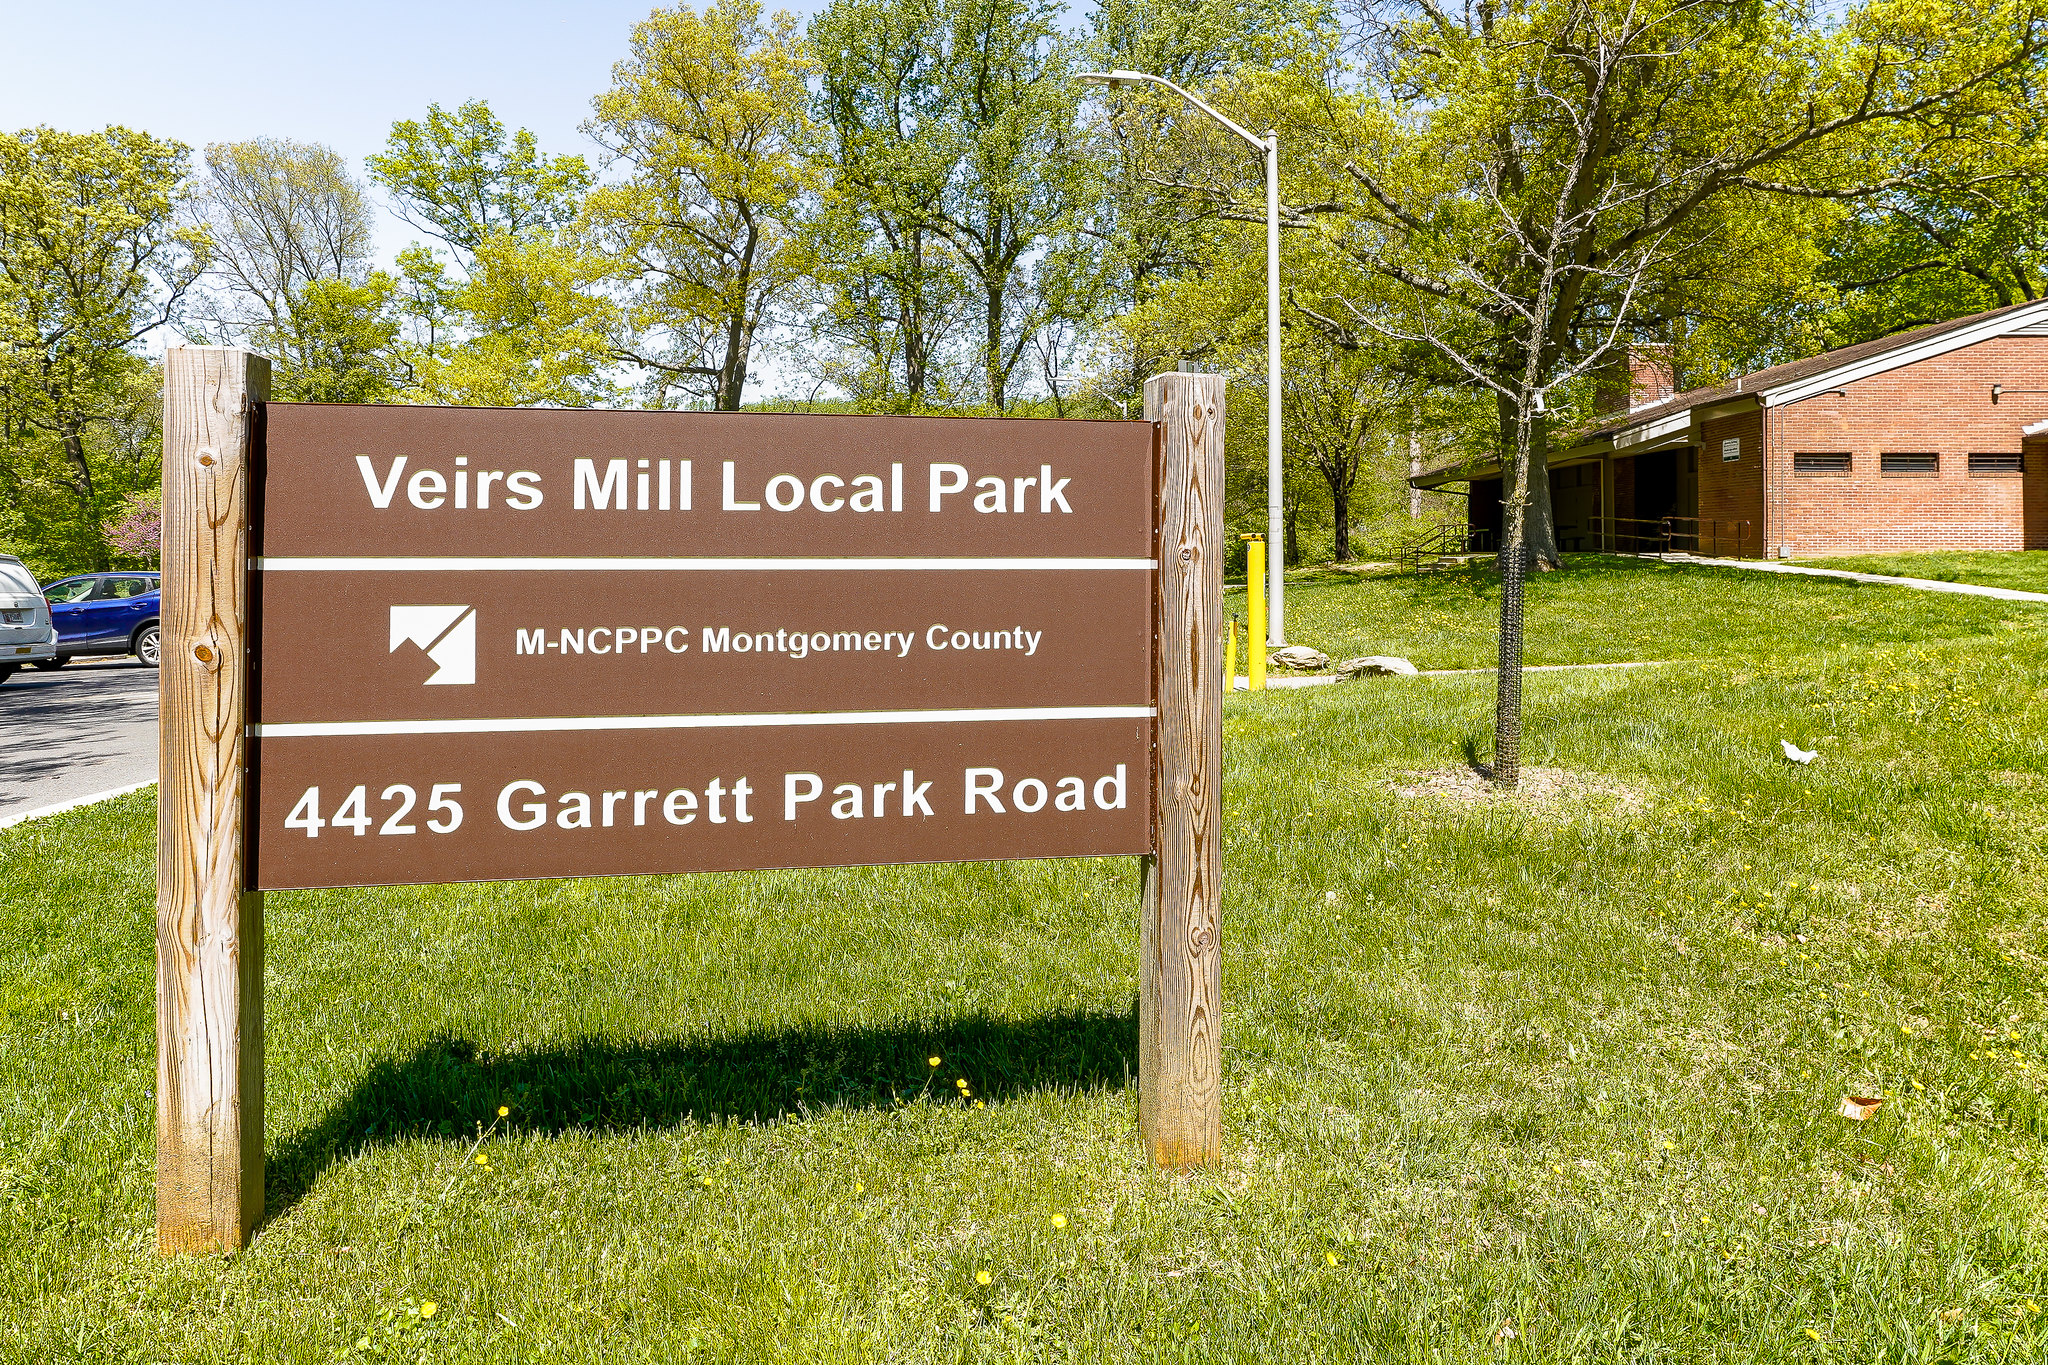 Veirs Mill Local Park